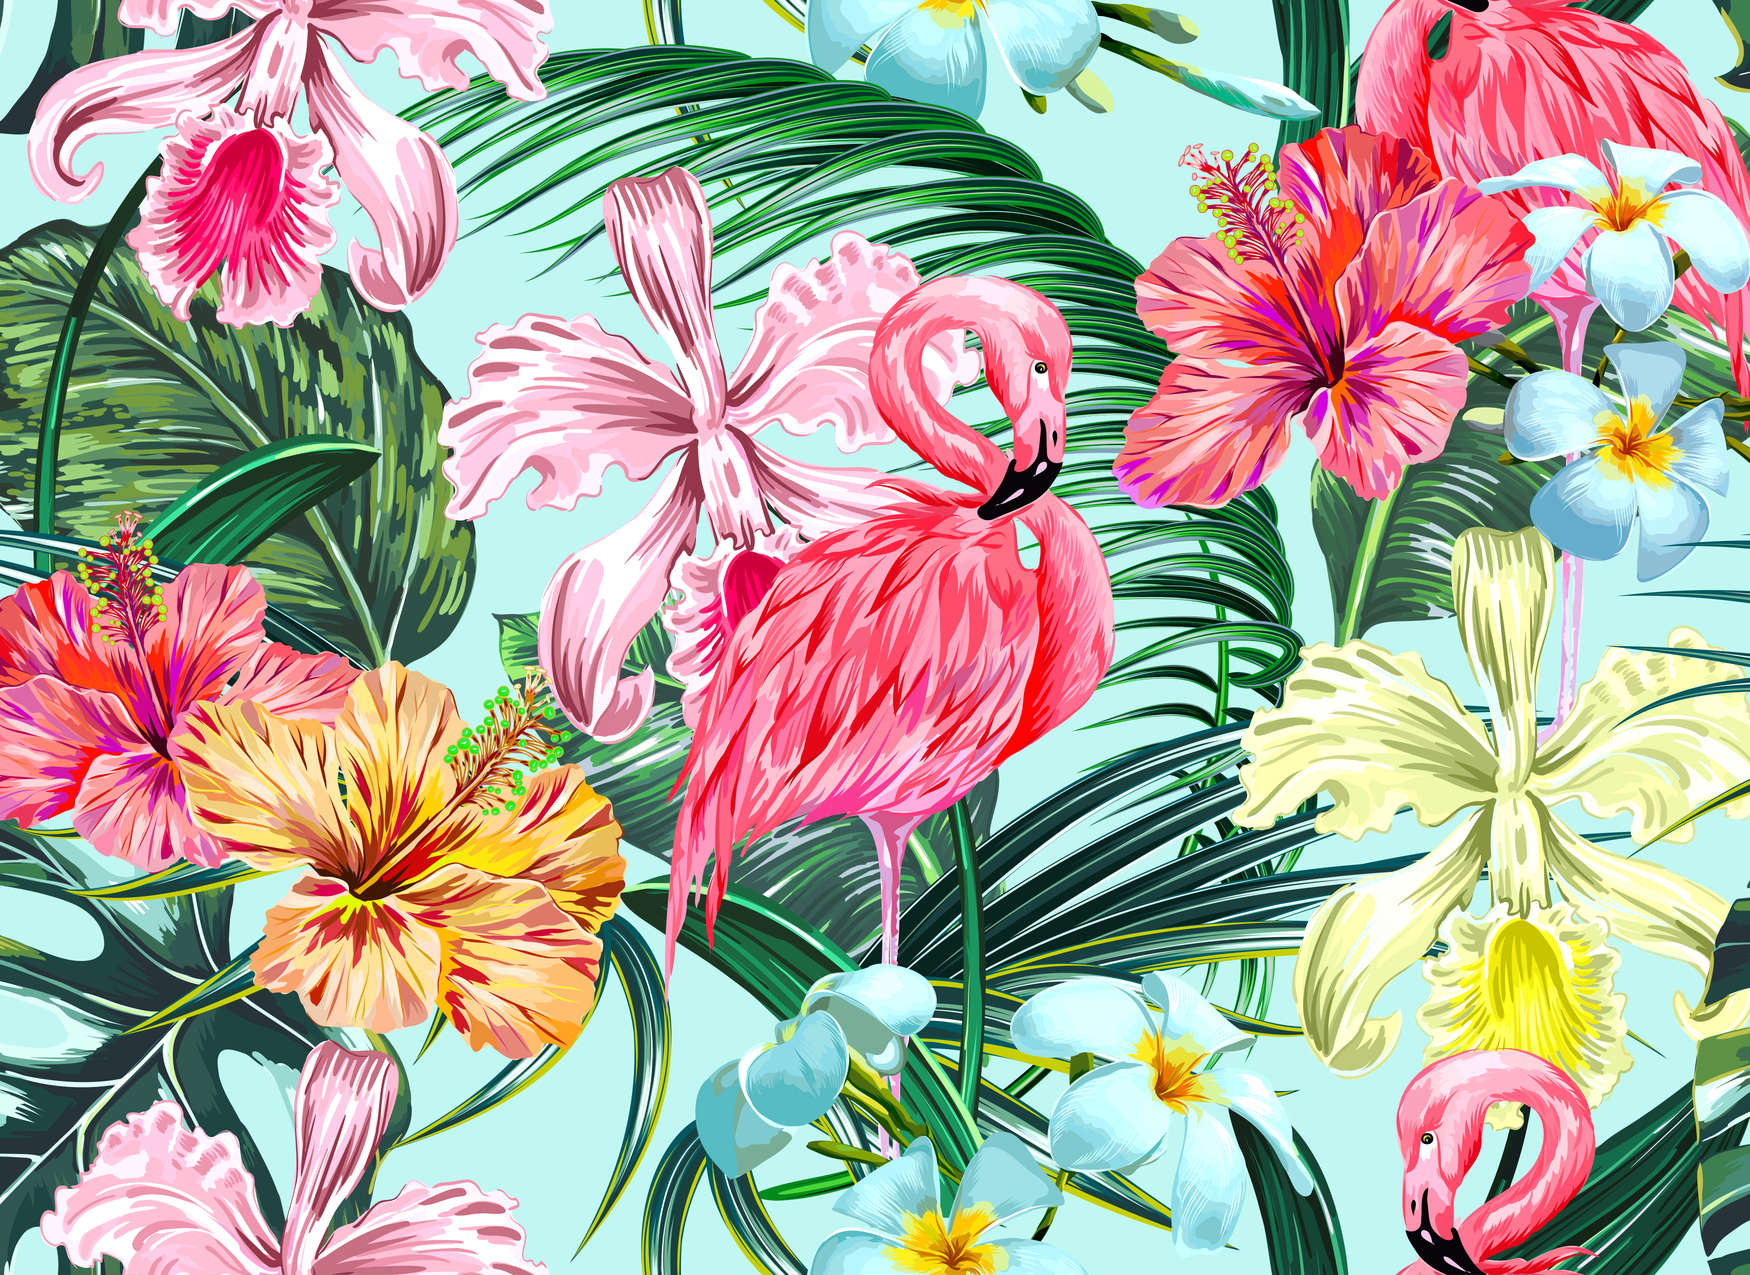             Tropical mural with flamingo - colourful, blue, green
        